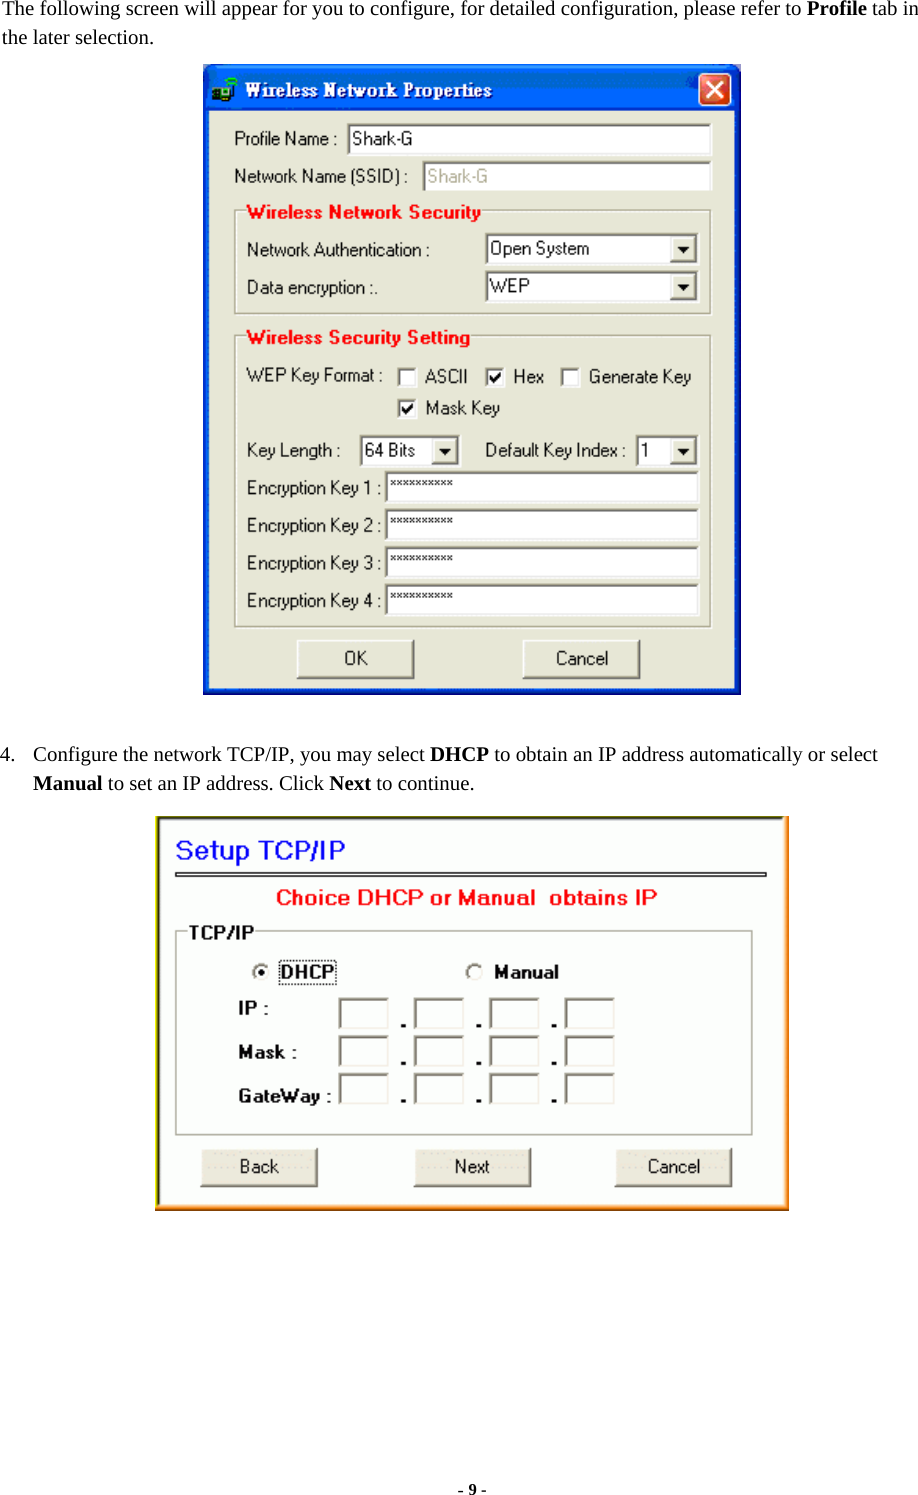  - 9 -  The following screen will appear for you to configure, for detailed configuration, please refer to Profile tab in the later selection.     4.  Configure the network TCP/IP, you may select DHCP to obtain an IP address automatically or select Manual to set an IP address. Click Next to continue.     